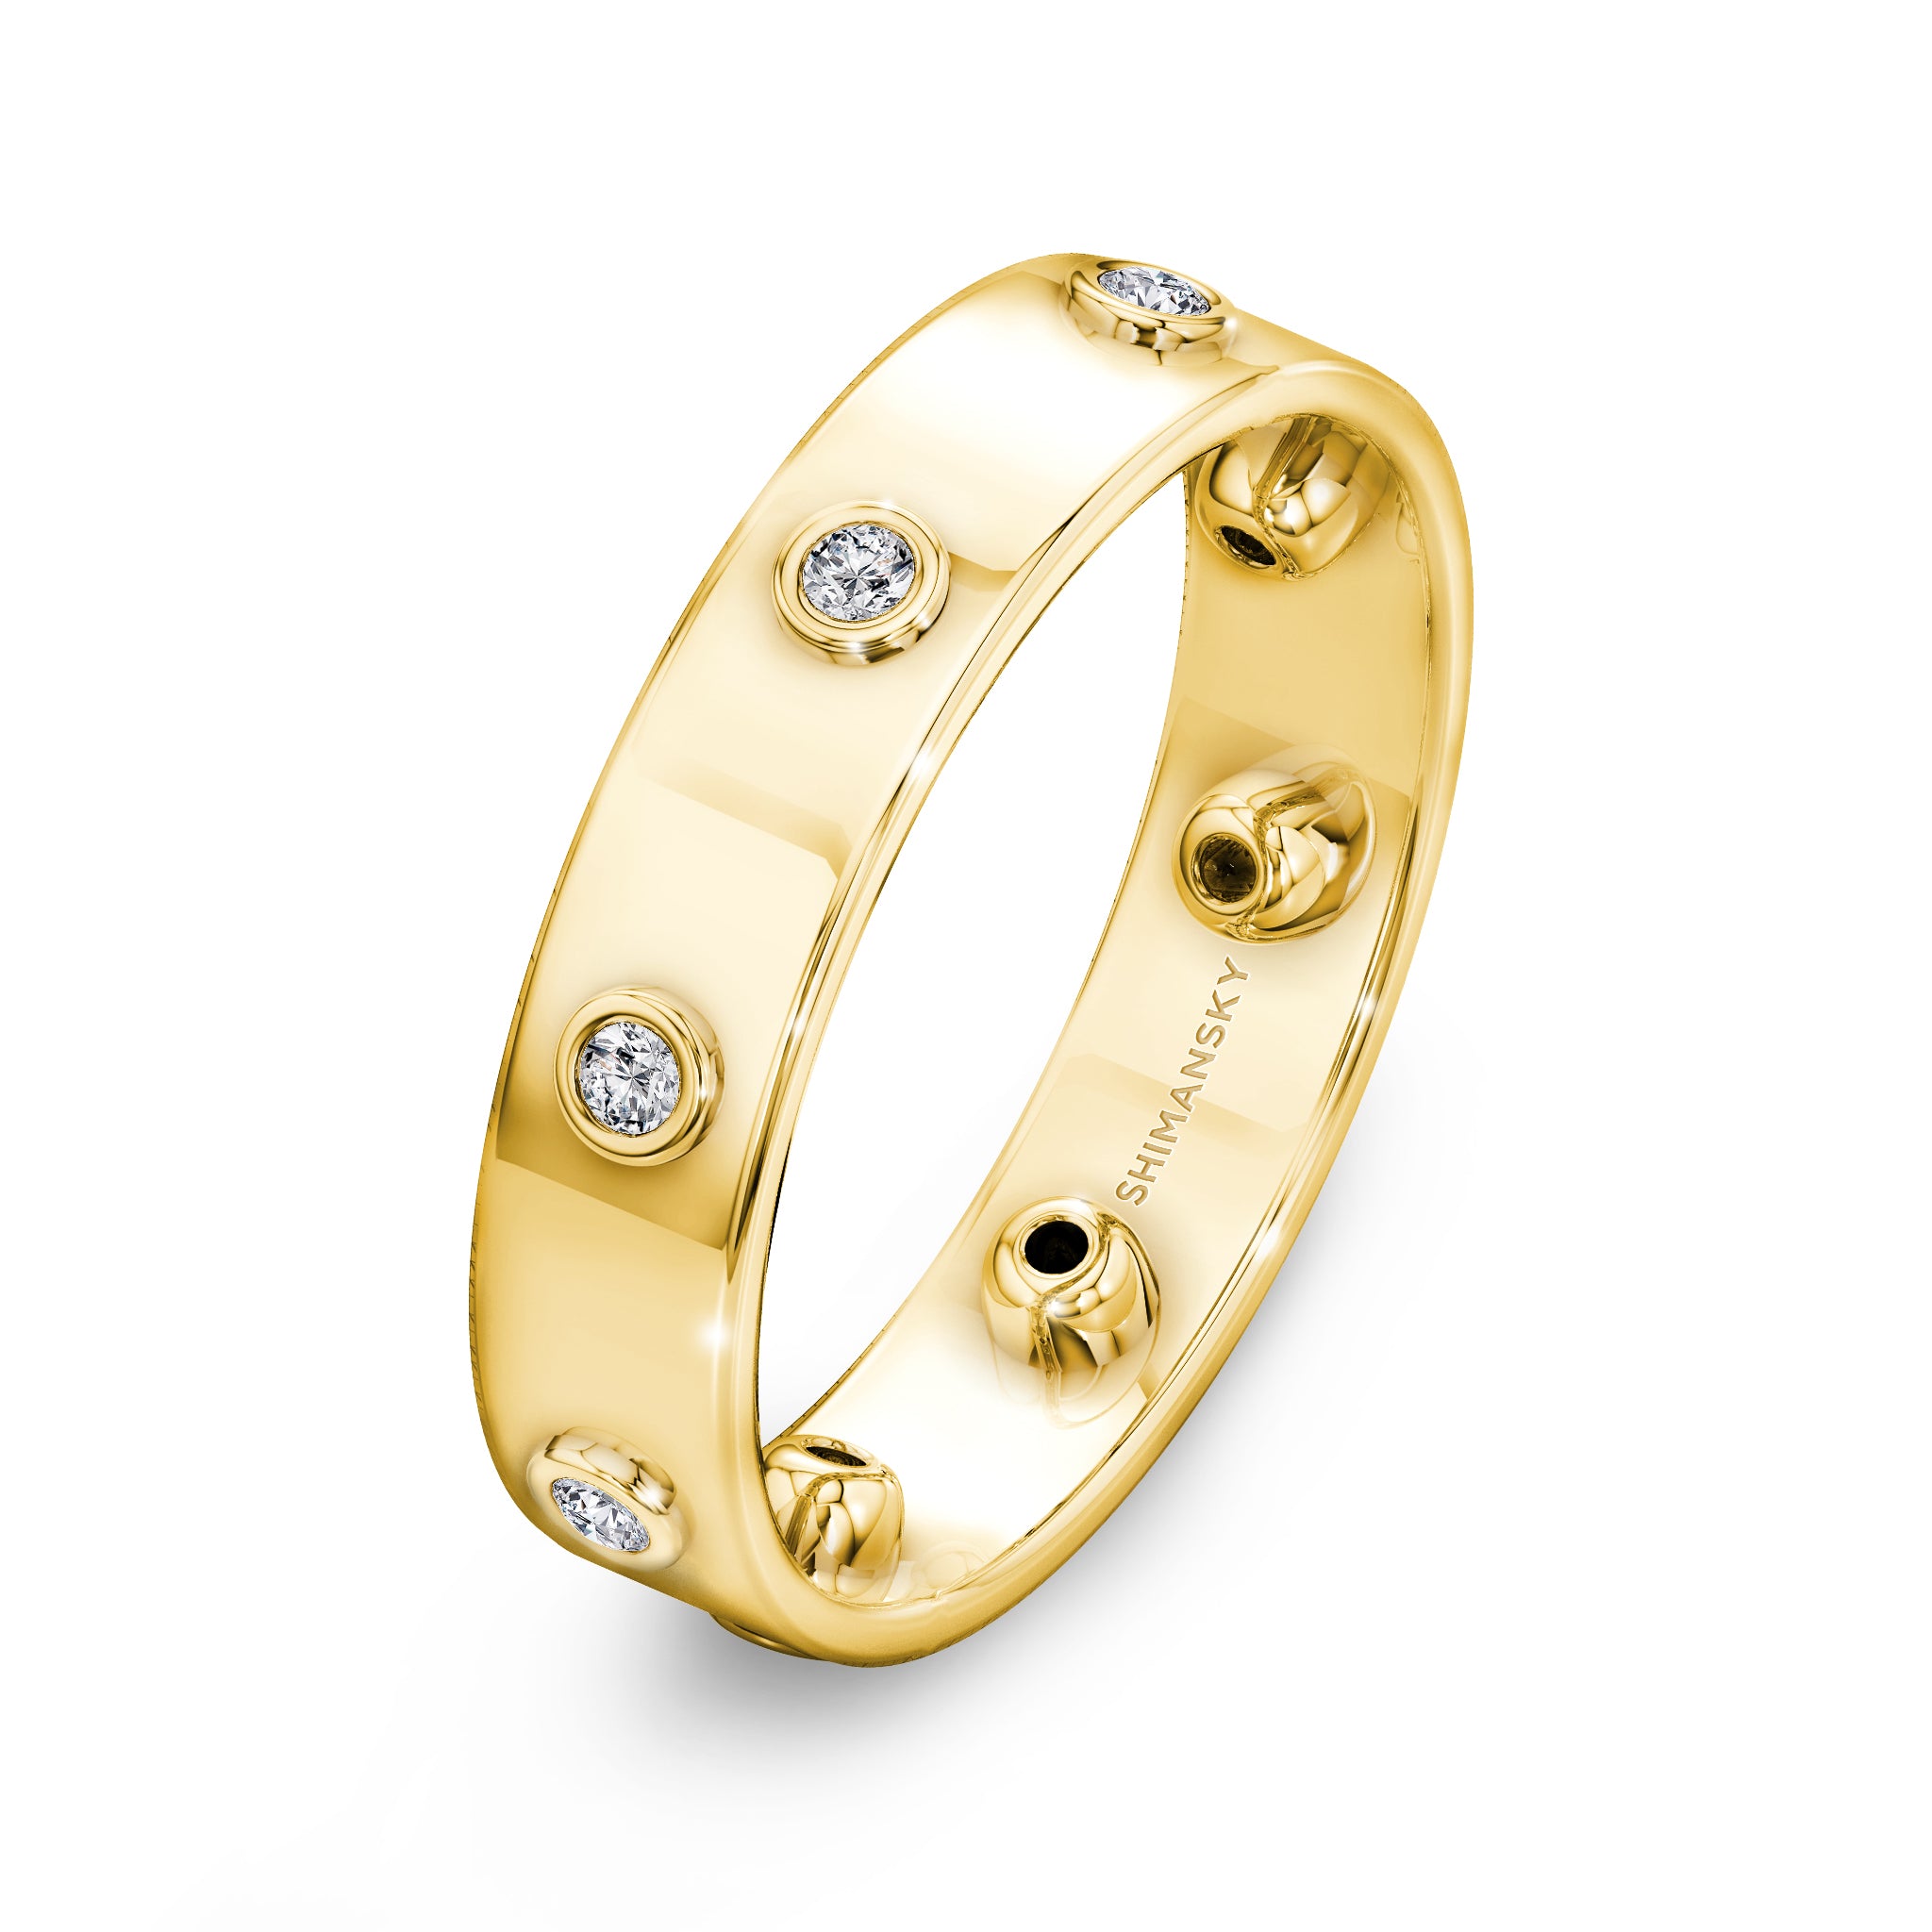 Shimansky - Caesar Classic Diamond Ring 0.10ct crafted in 18K Yellow Gold